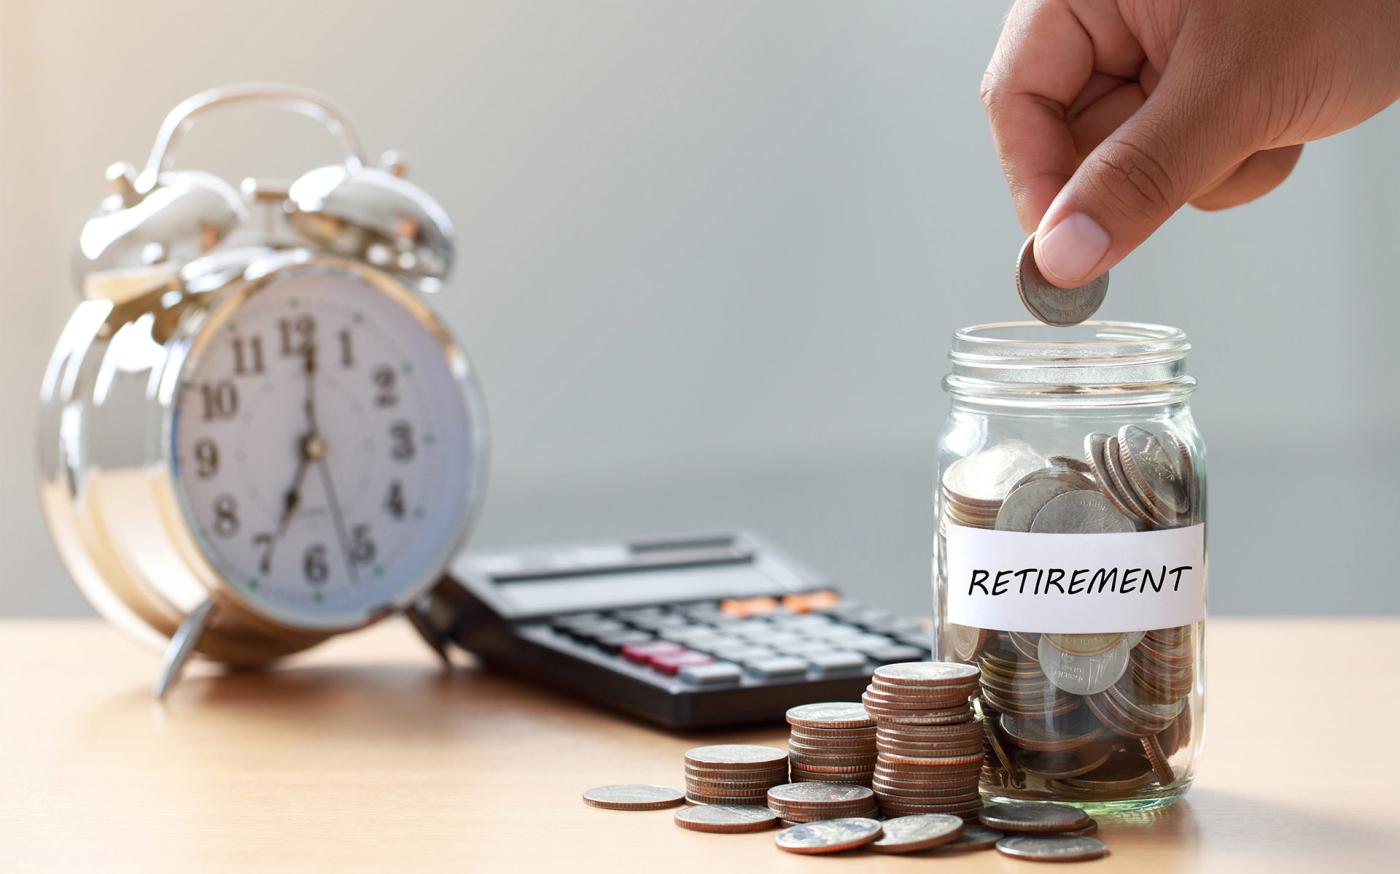 It’s Never Too Late to Save for Retirement